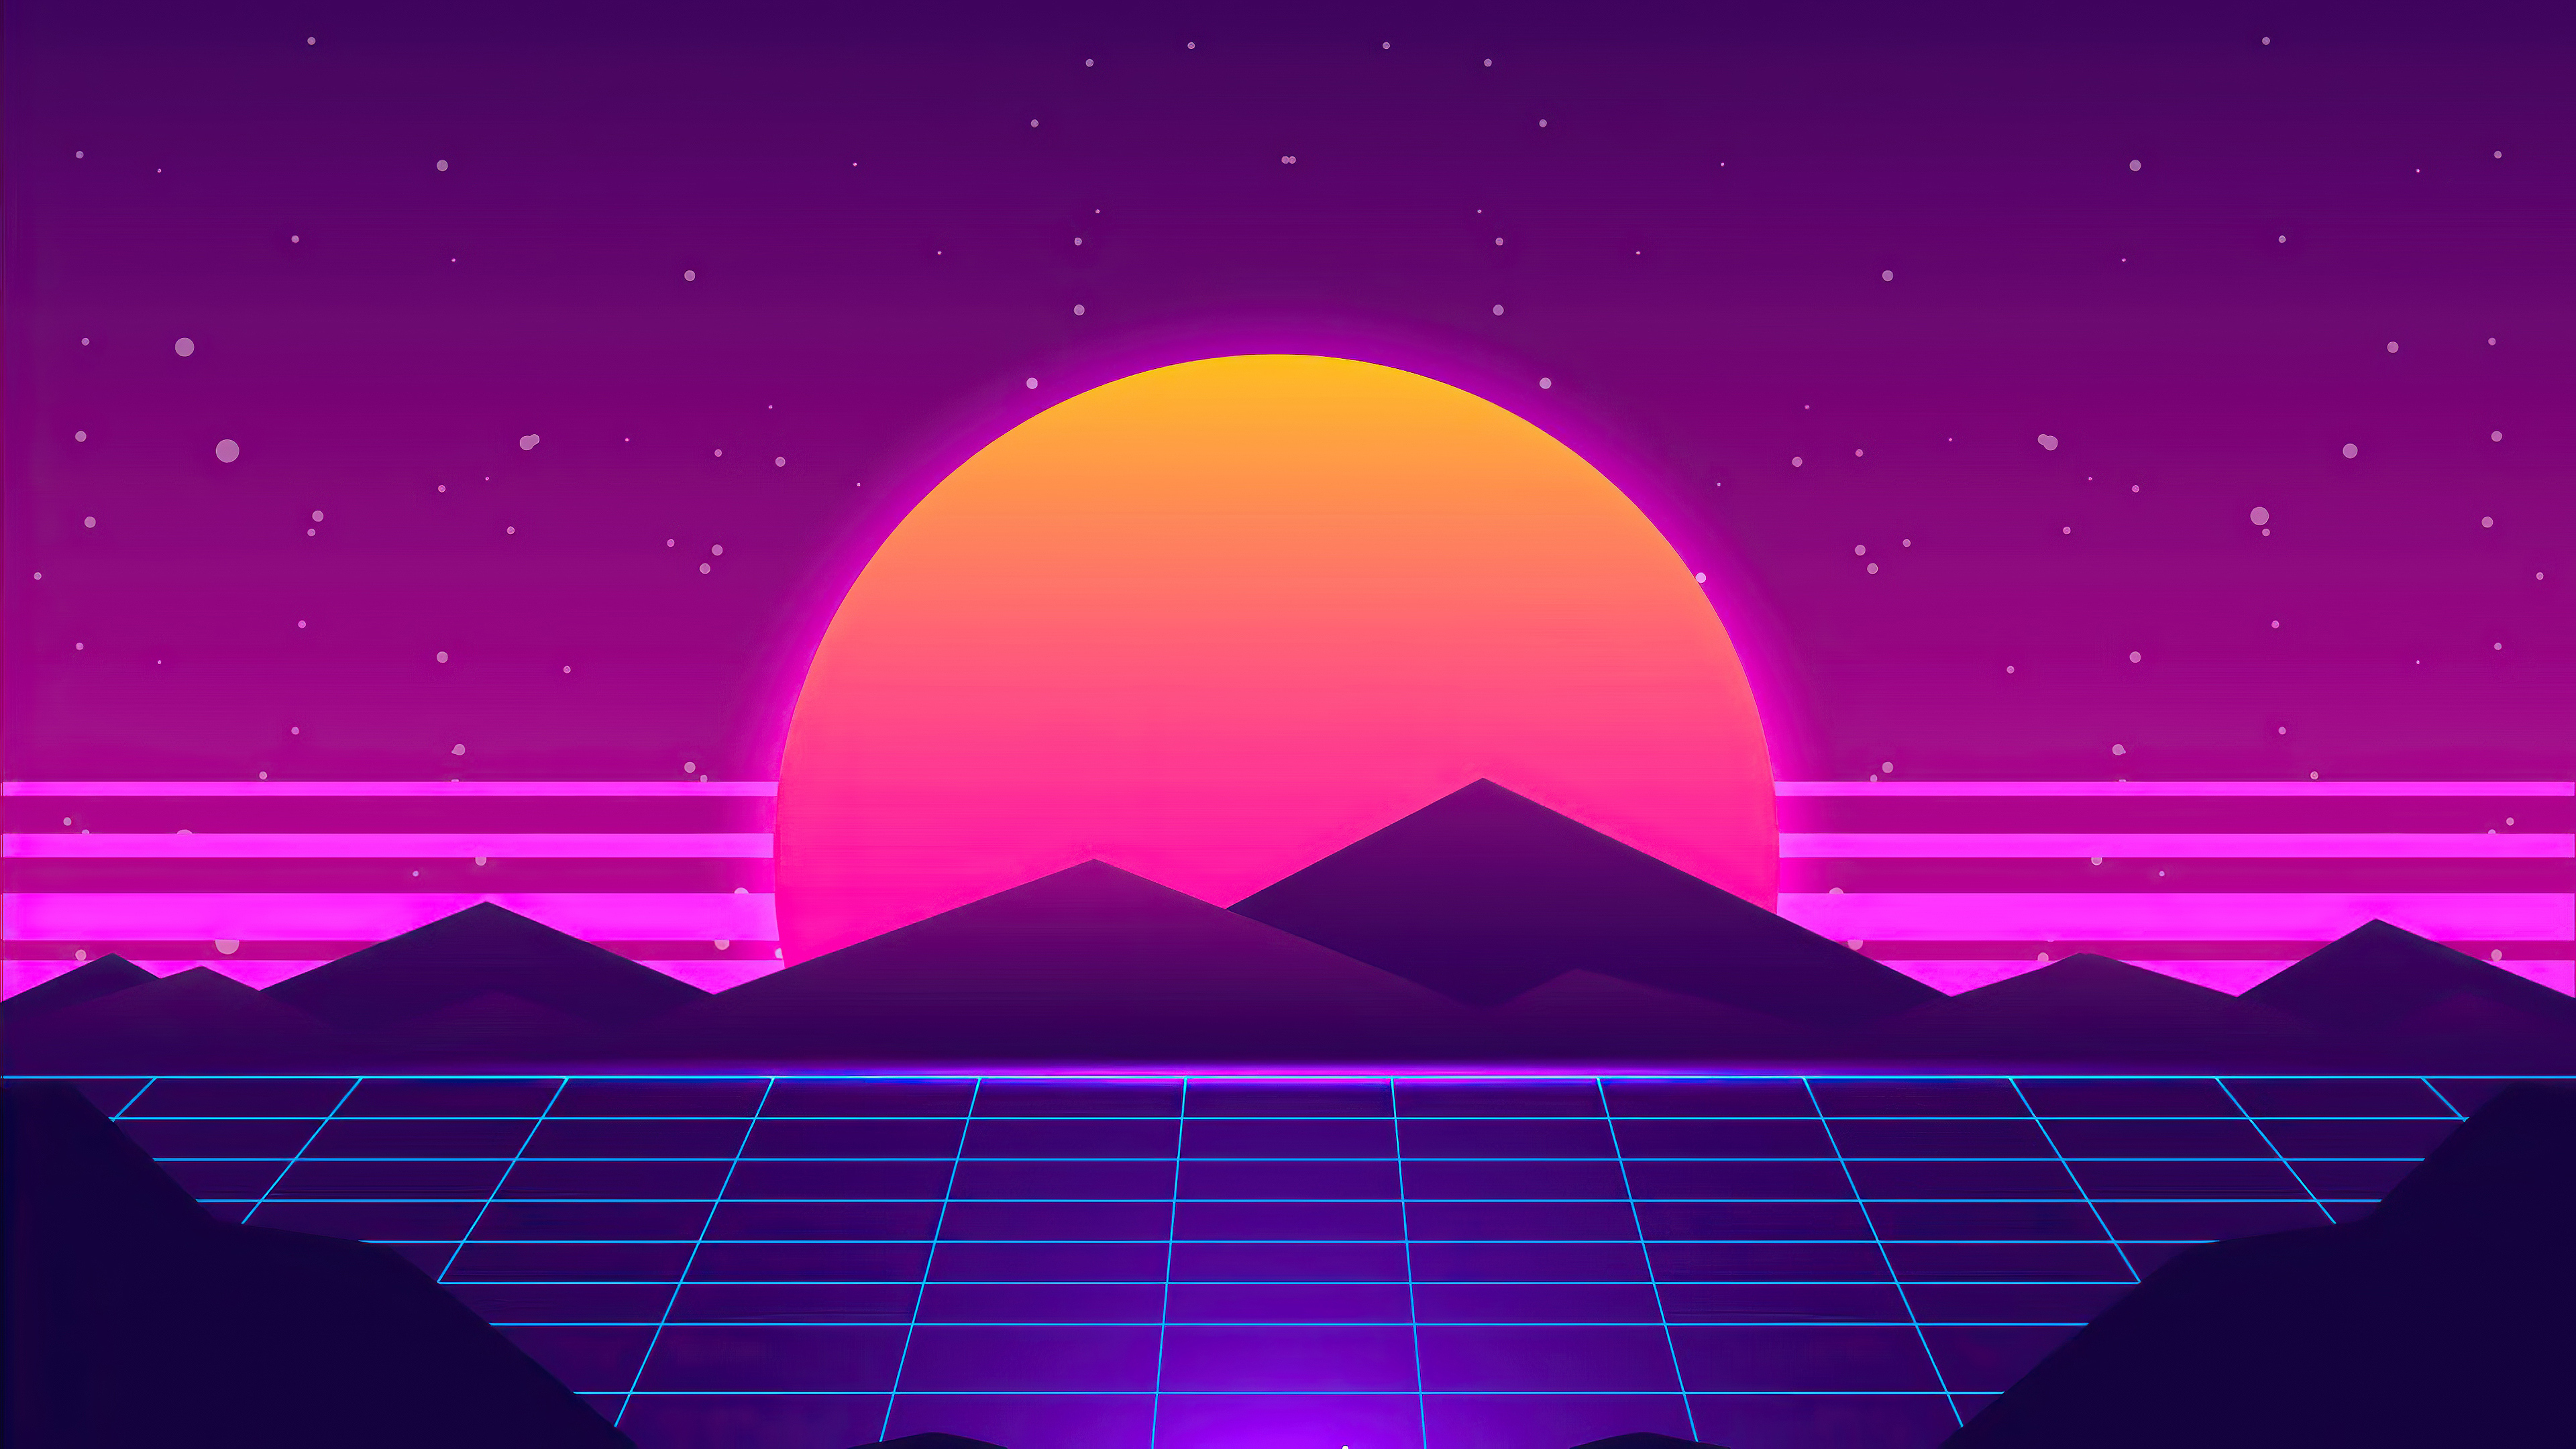 24 Synthwave Computer Wallpapers Wallpapersafari Free Hot Nude 